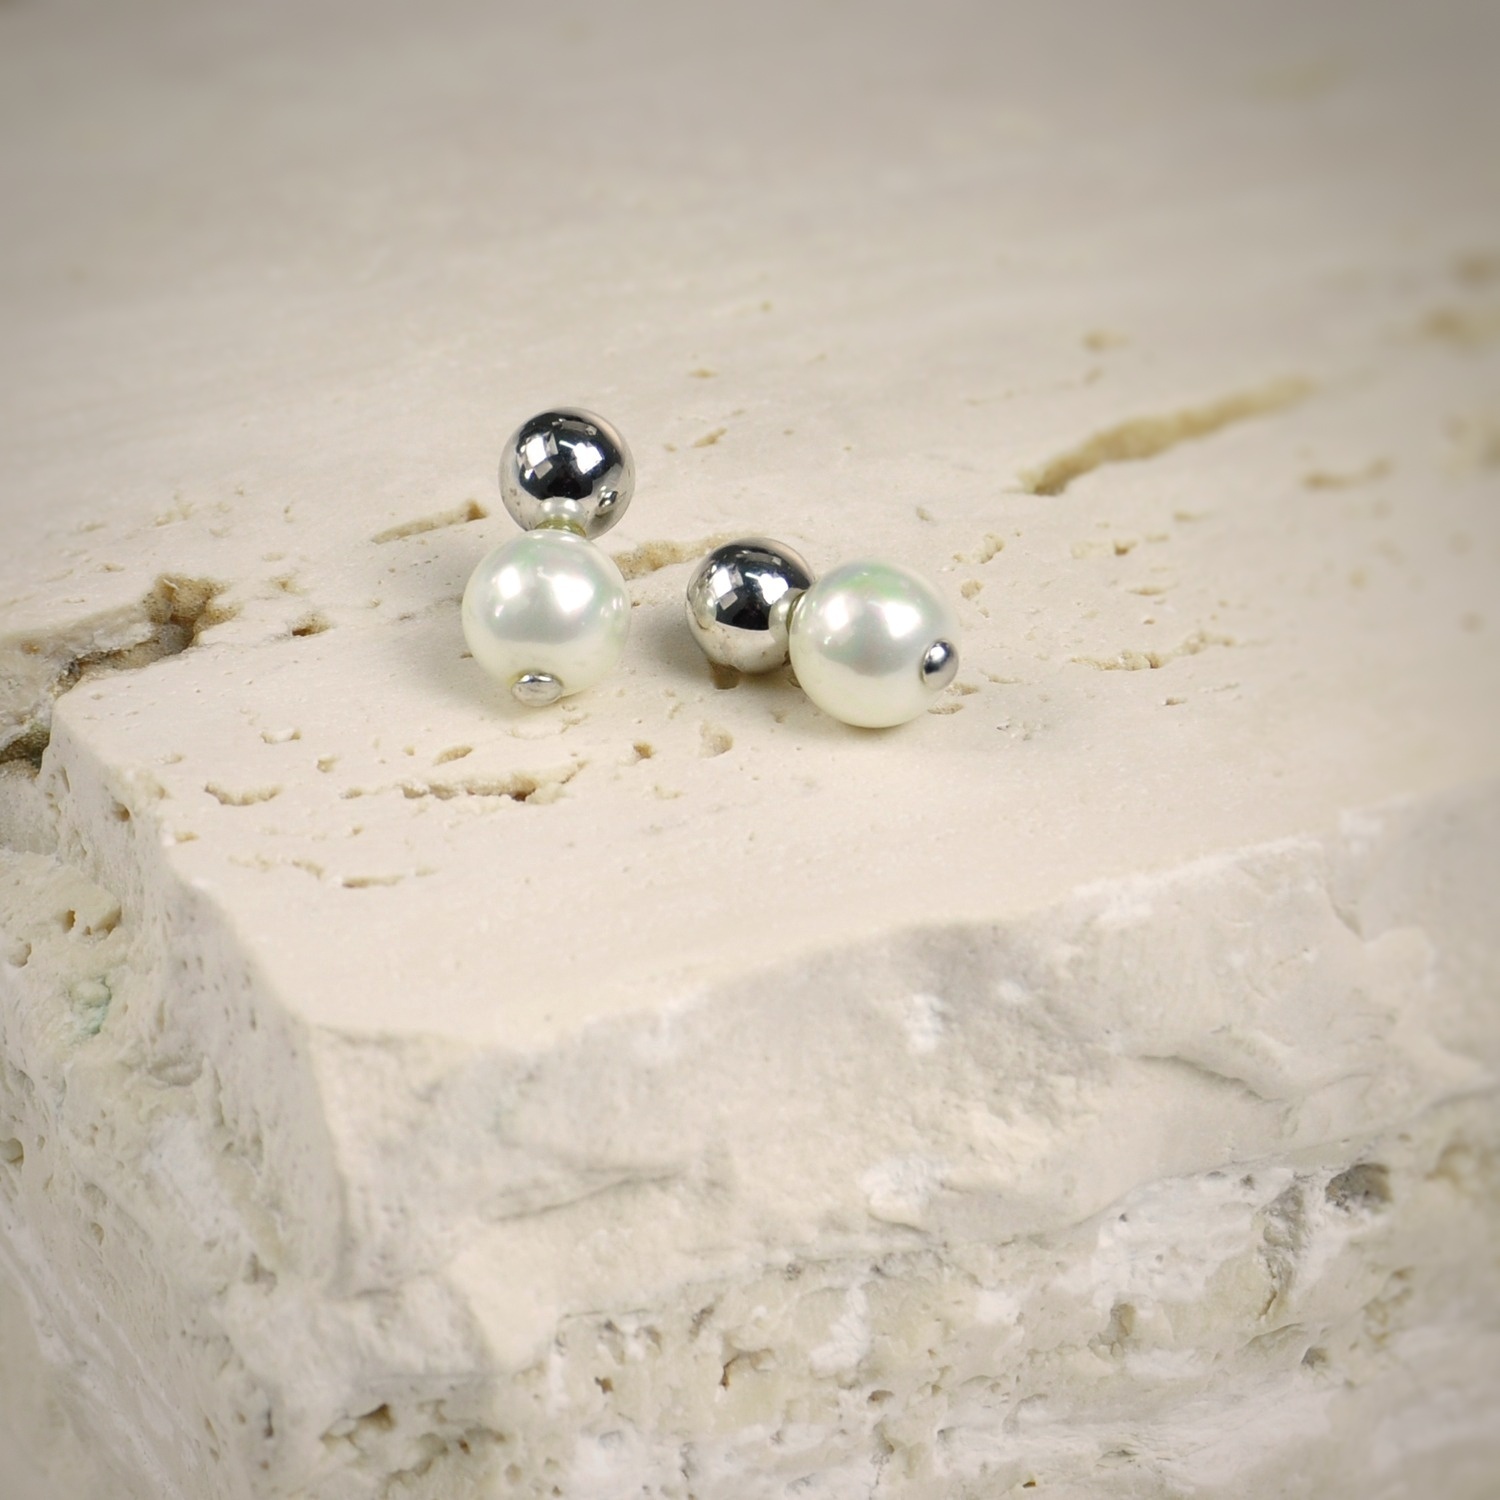 Earrings in Sterling Silver with lovely 10 mm. White Pearls 1